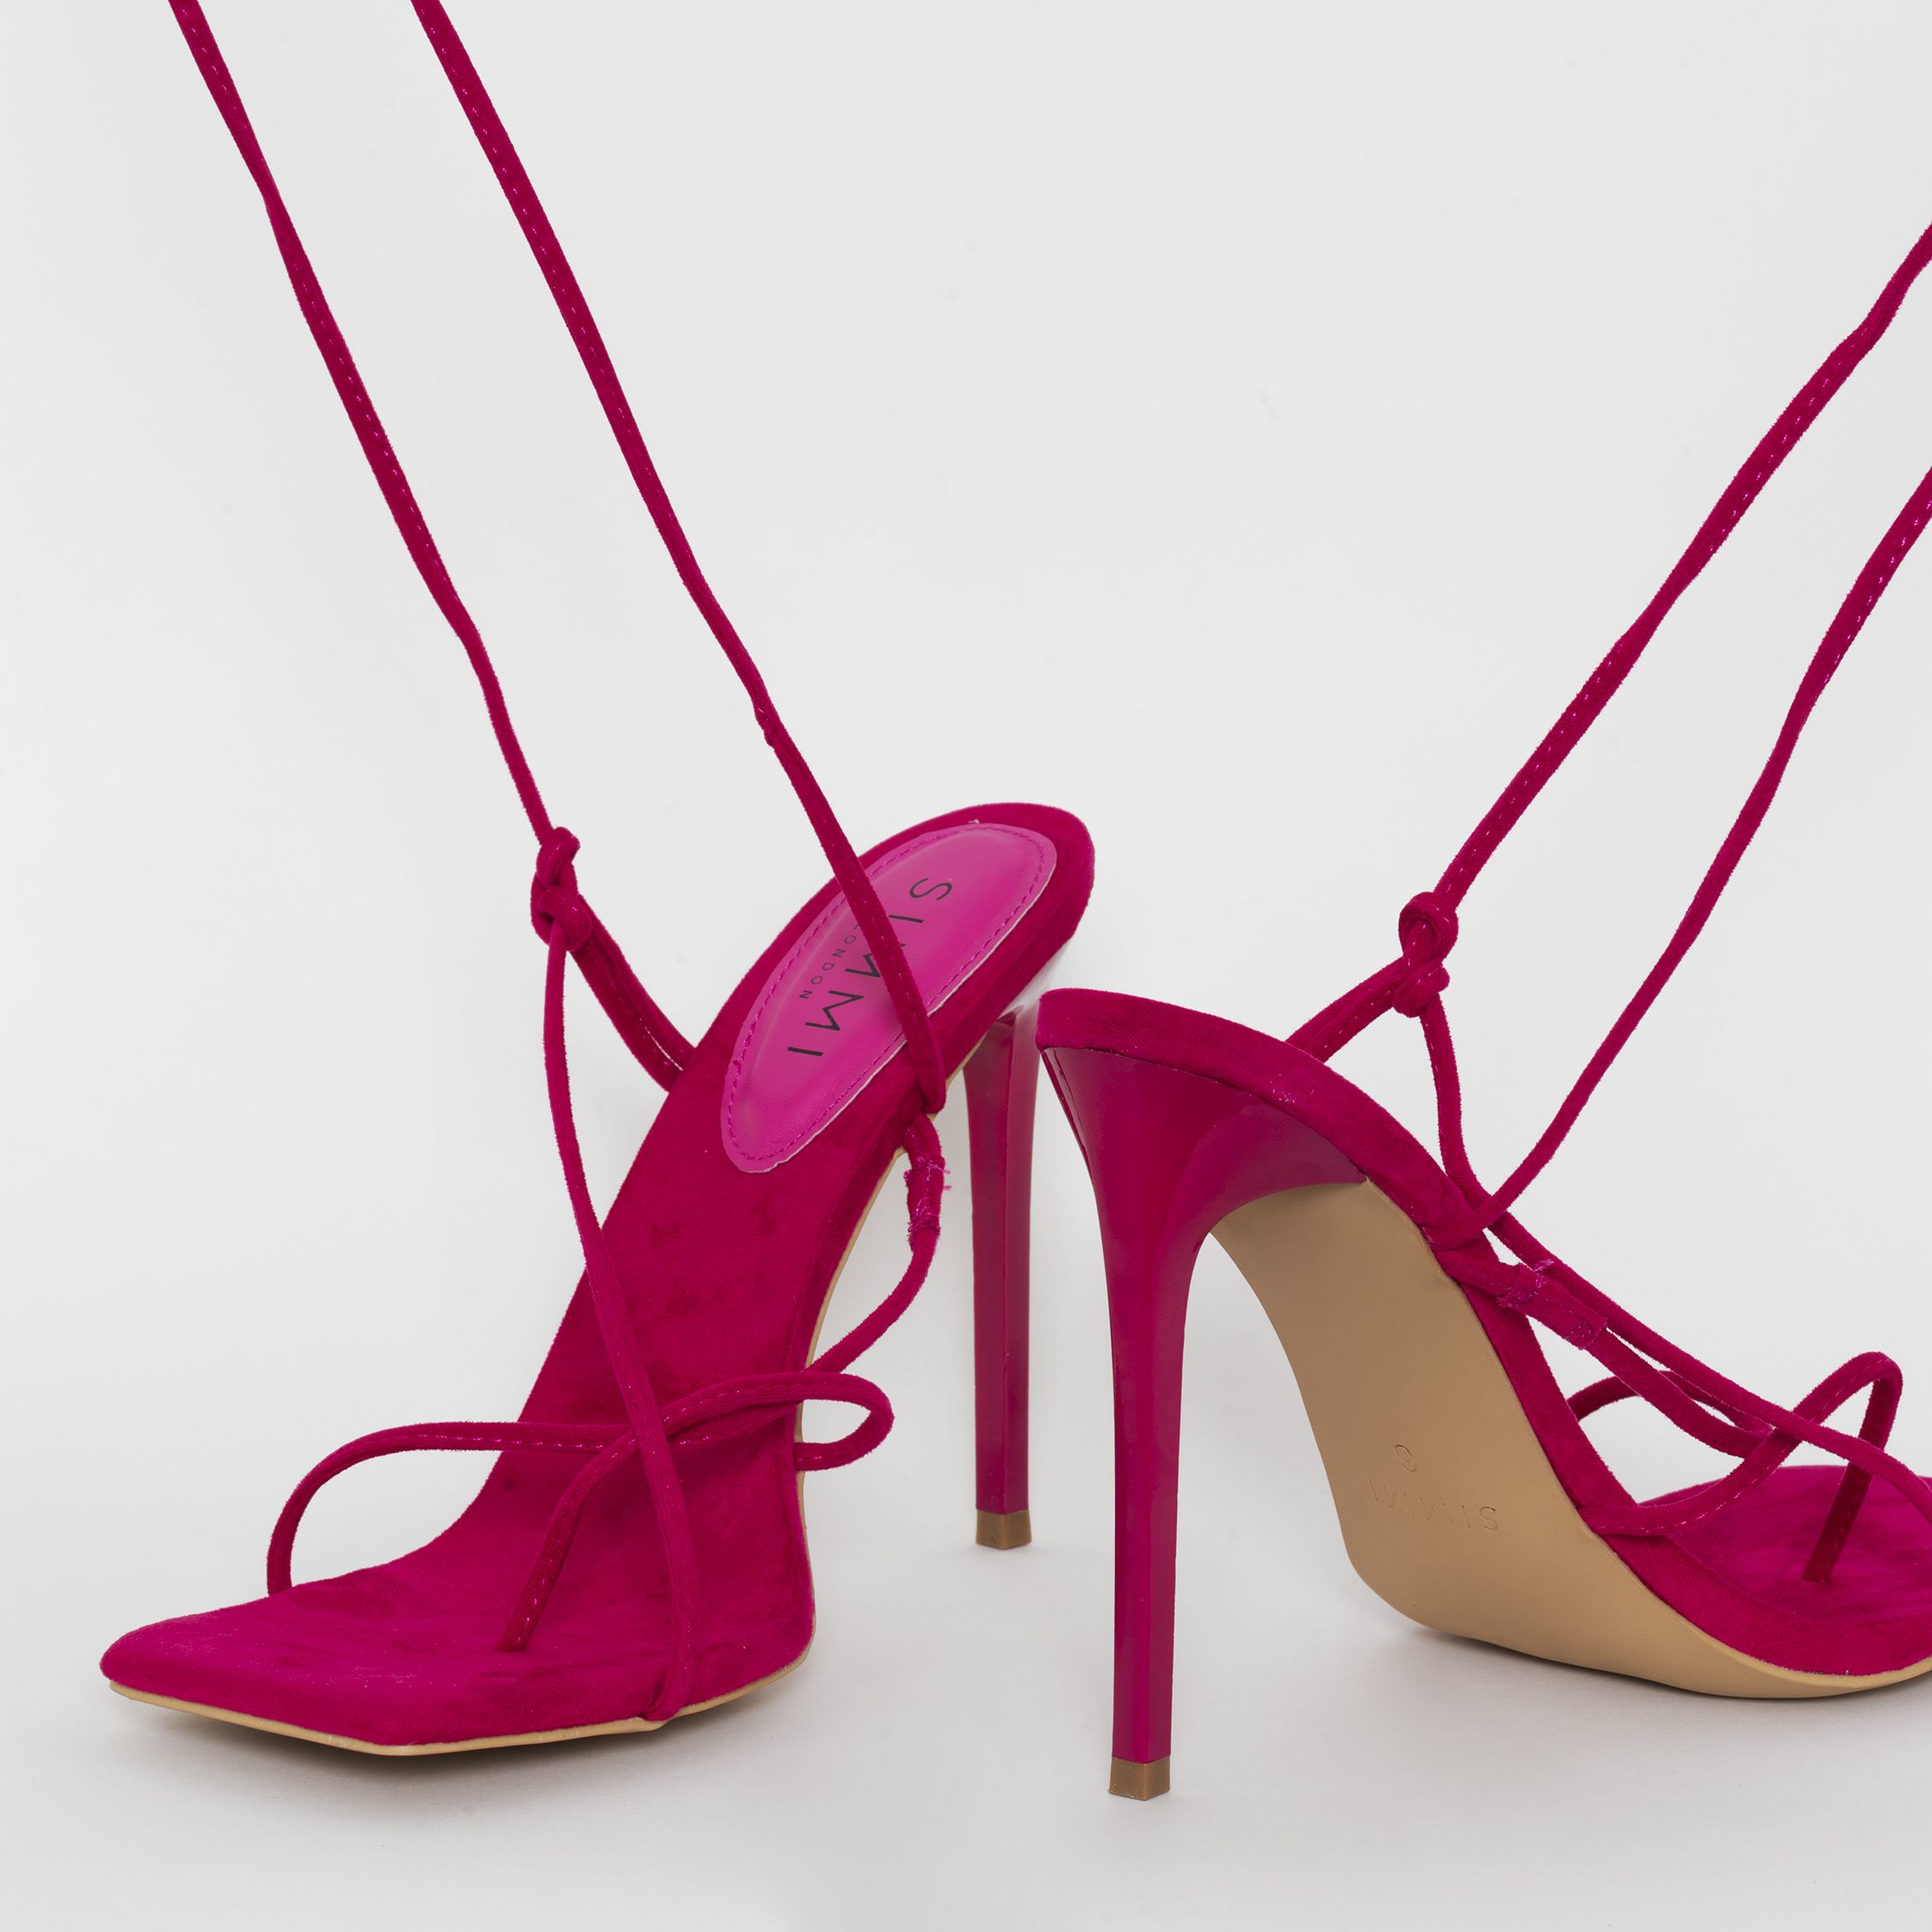 Serenity Fuchsia Pink Suede Lace Up Stiletto Heels